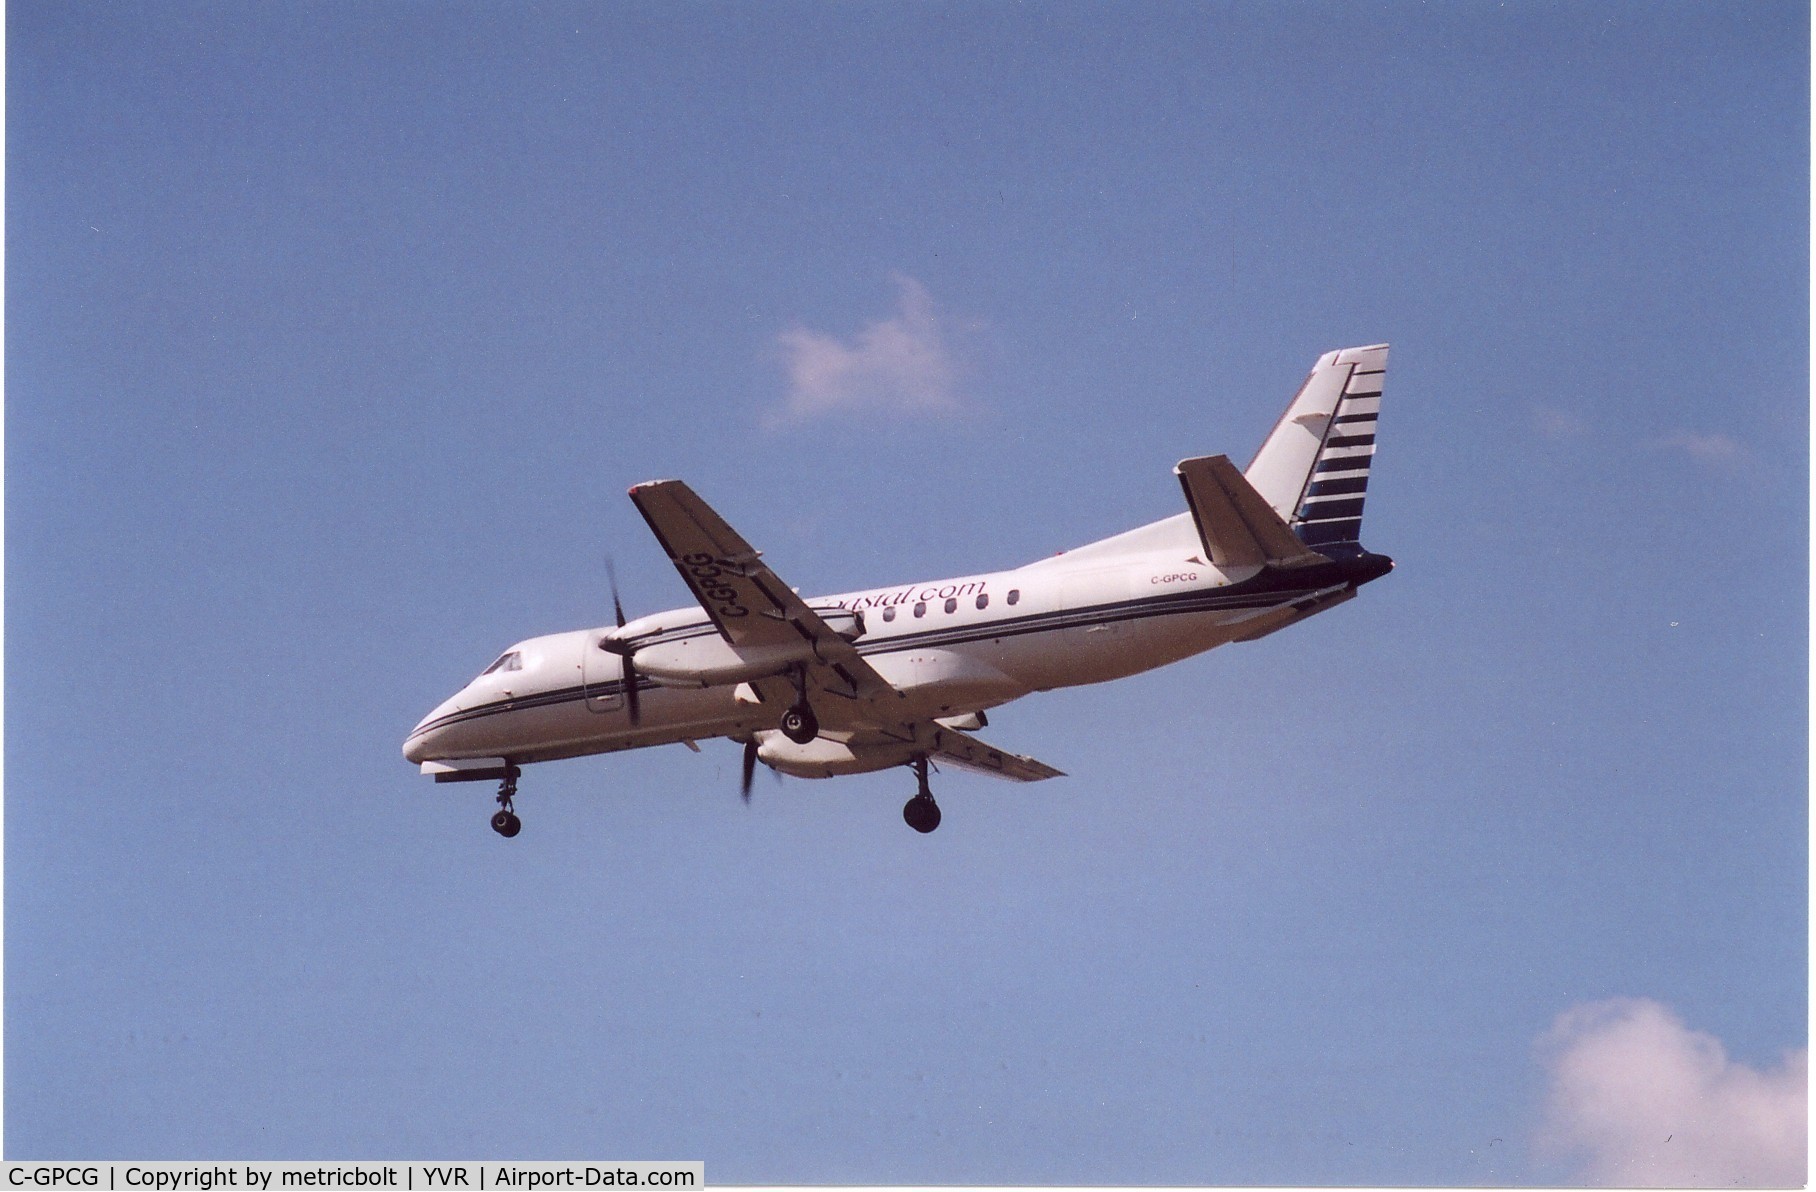 C-GPCG, 1987 Saab 340A C/N 340A-094, Before painting to Pacific Coastal livery